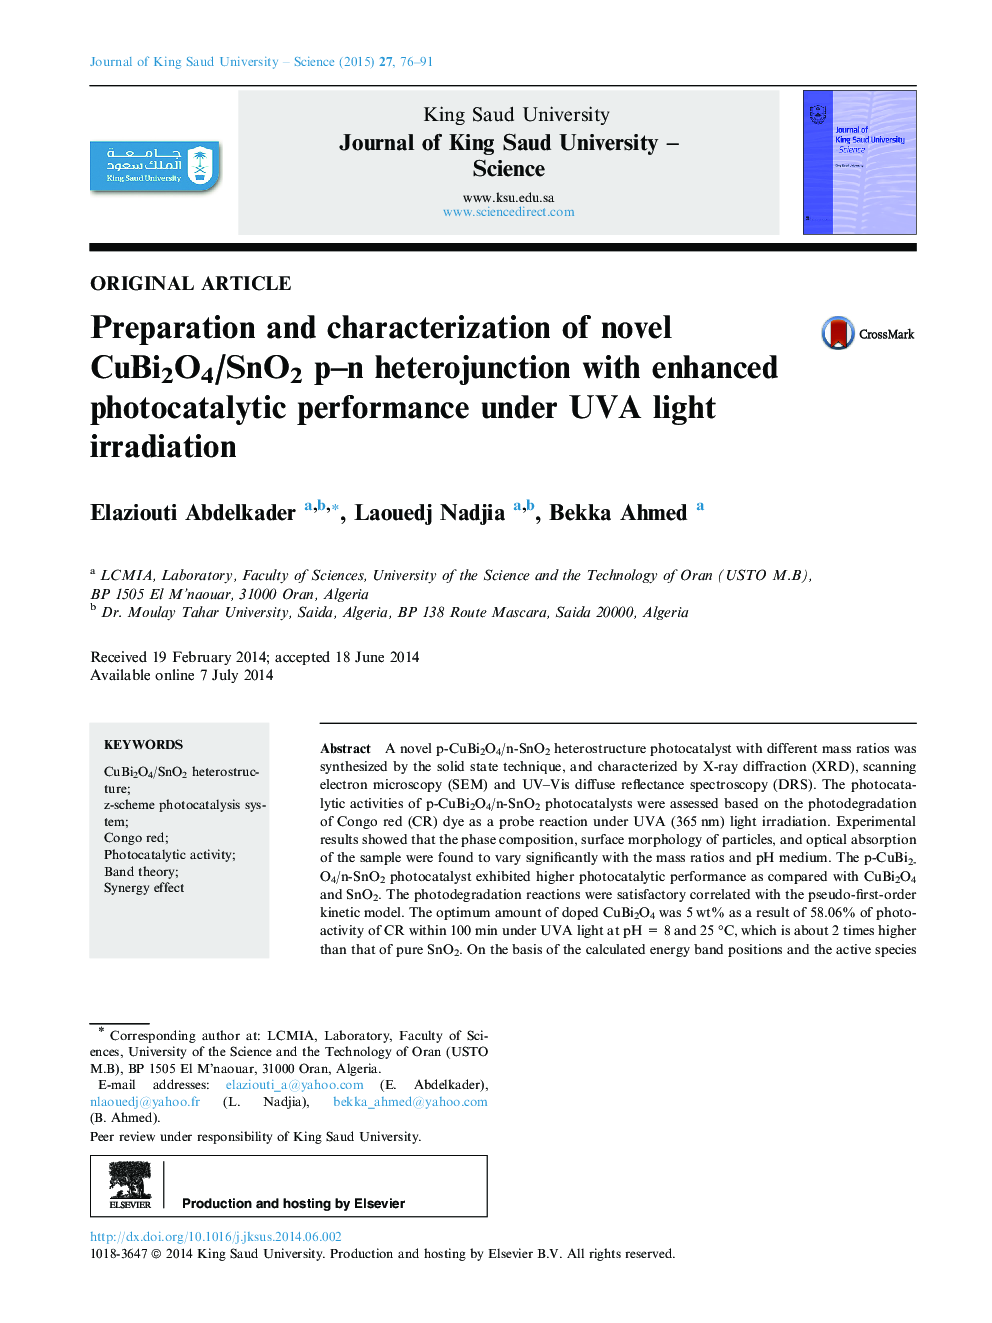 Preparation and characterization of novel CuBi2O4/SnO2 p–n heterojunction with enhanced photocatalytic performance under UVA light irradiation 